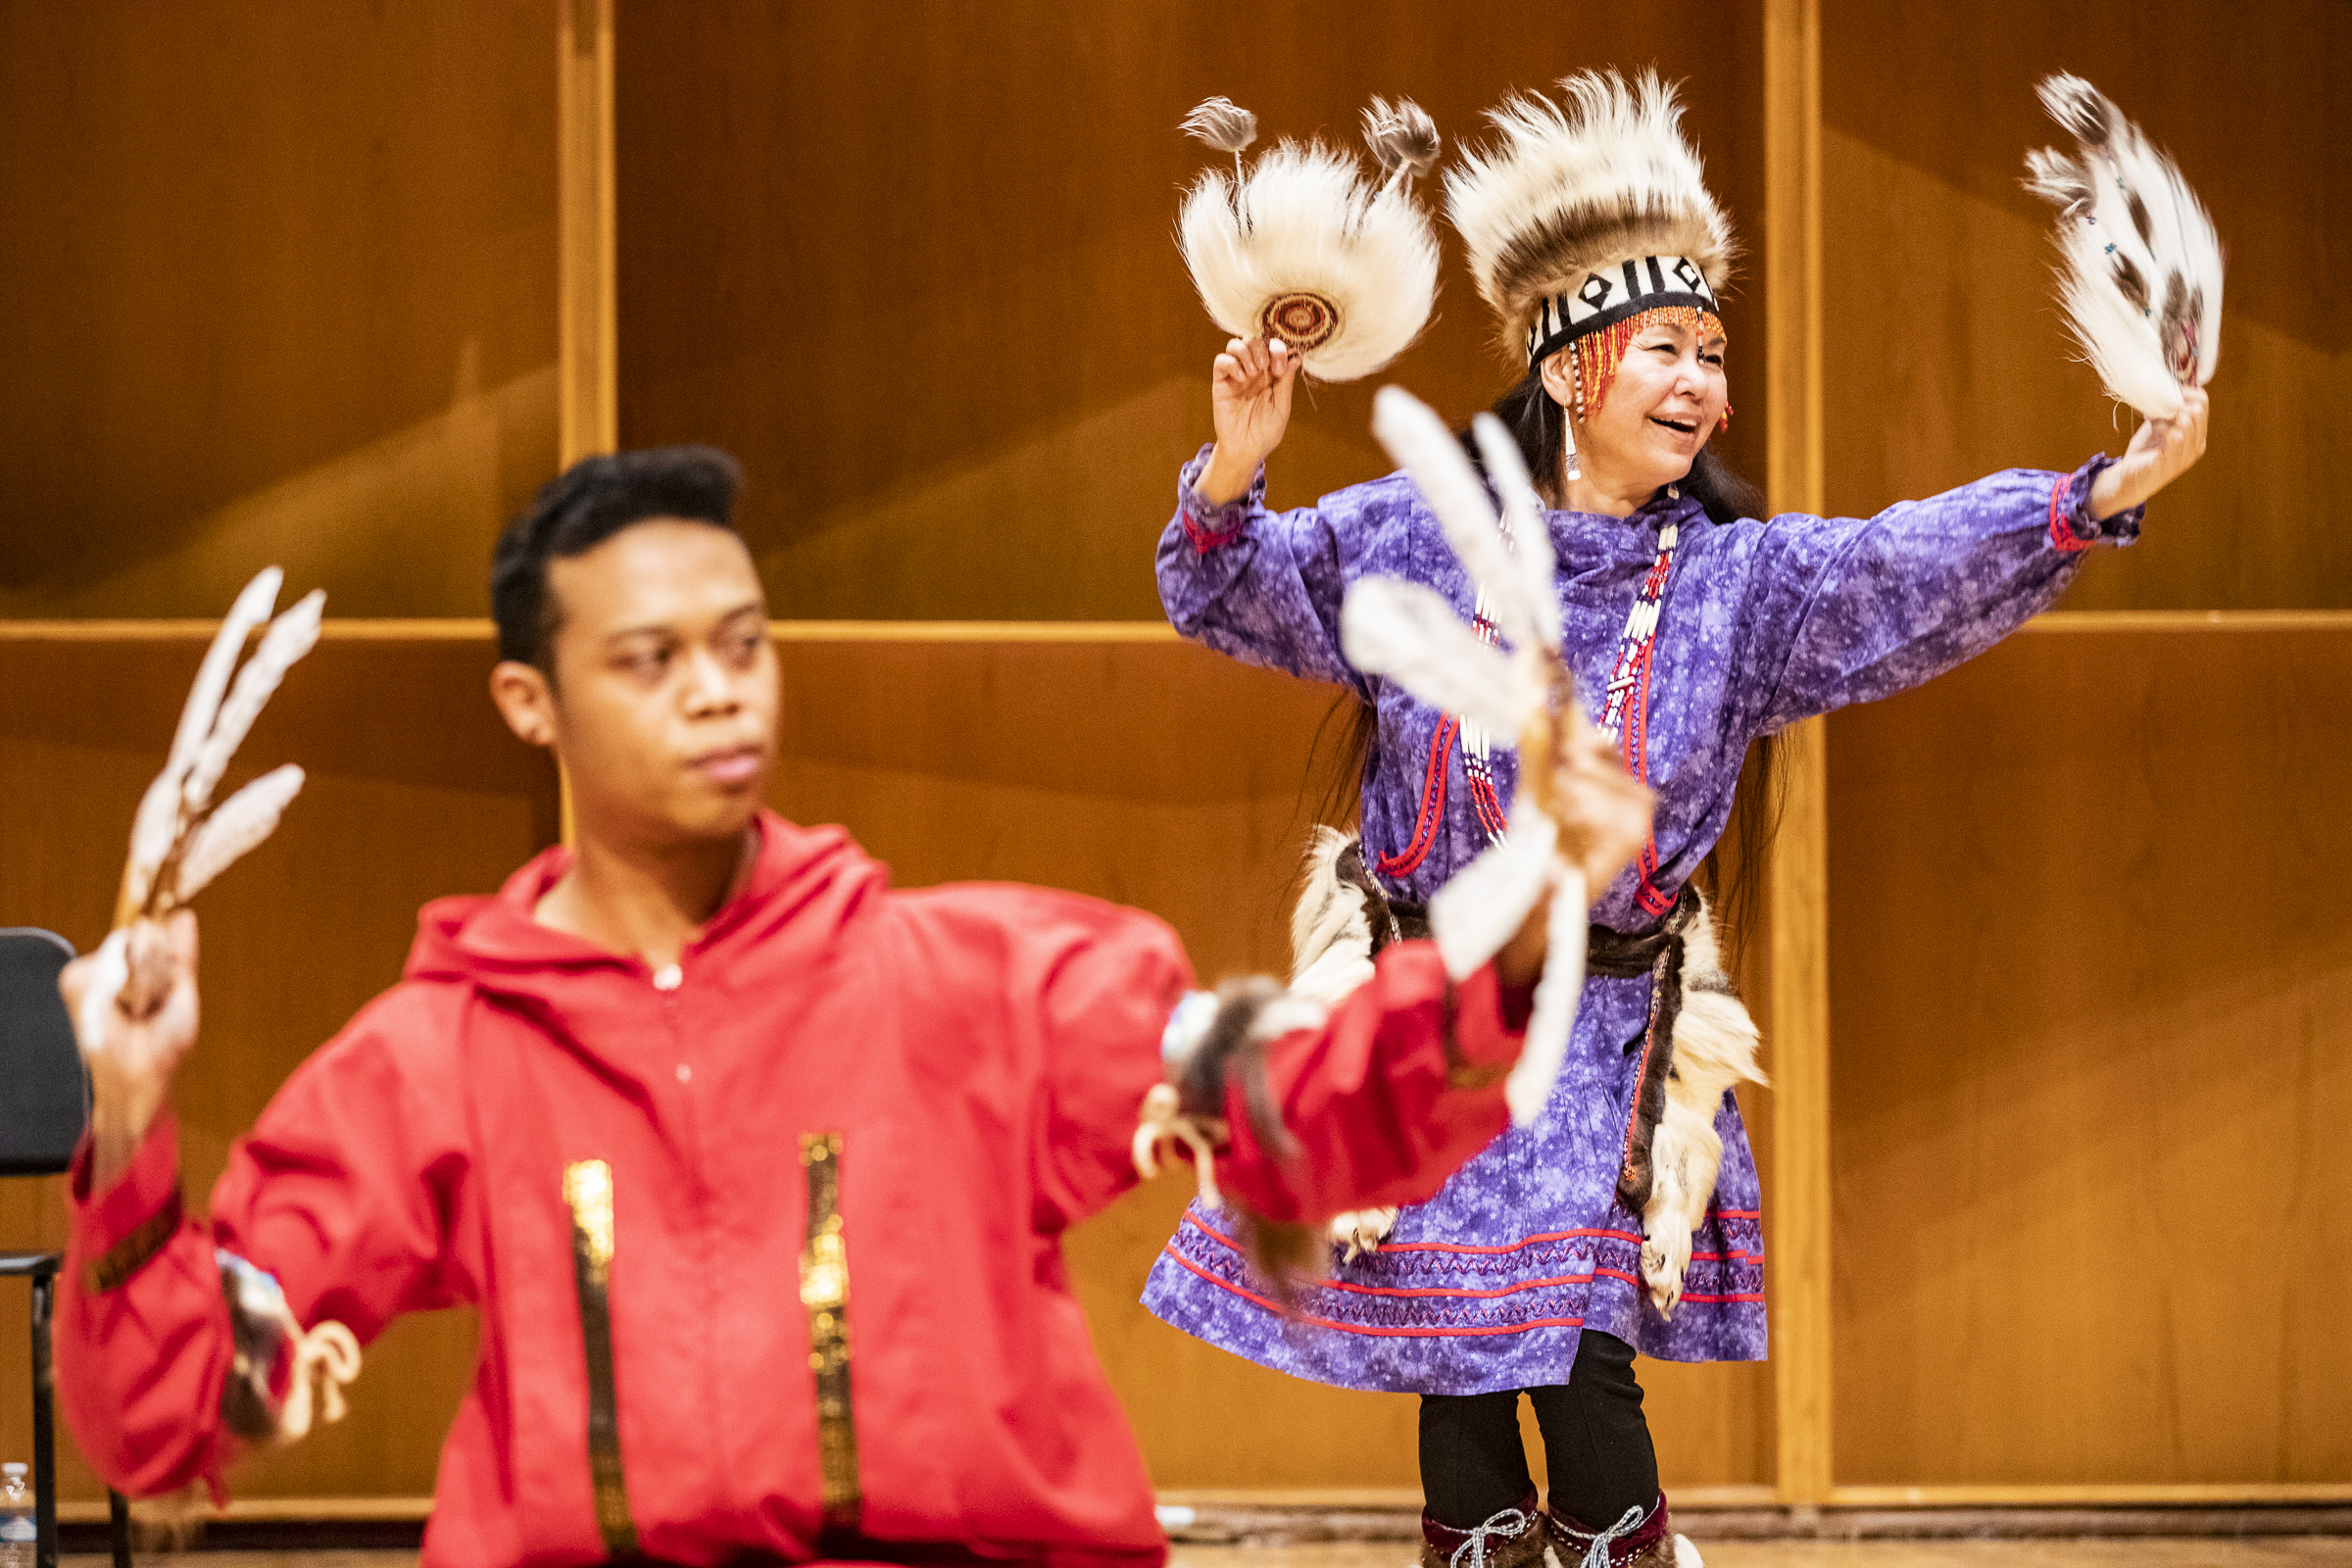 Two Yup'ik dancers dressed in regalia with fans performing onstage.